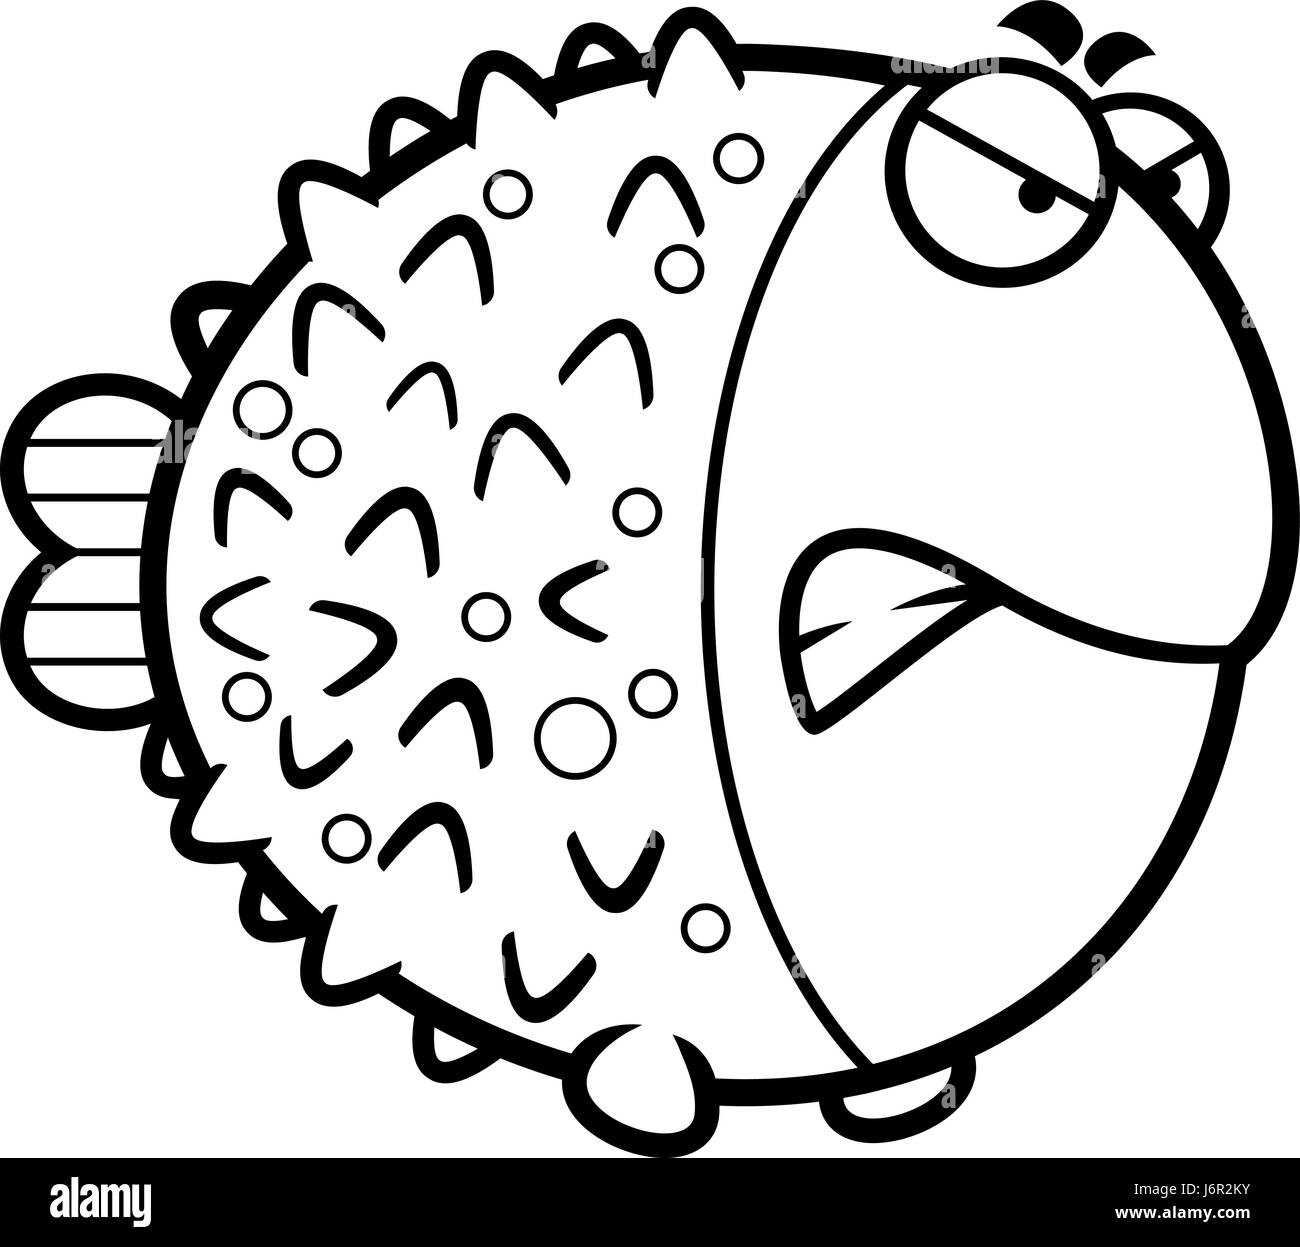 A cartoon illustration of a pufferfish with an angry expression. Stock Vector